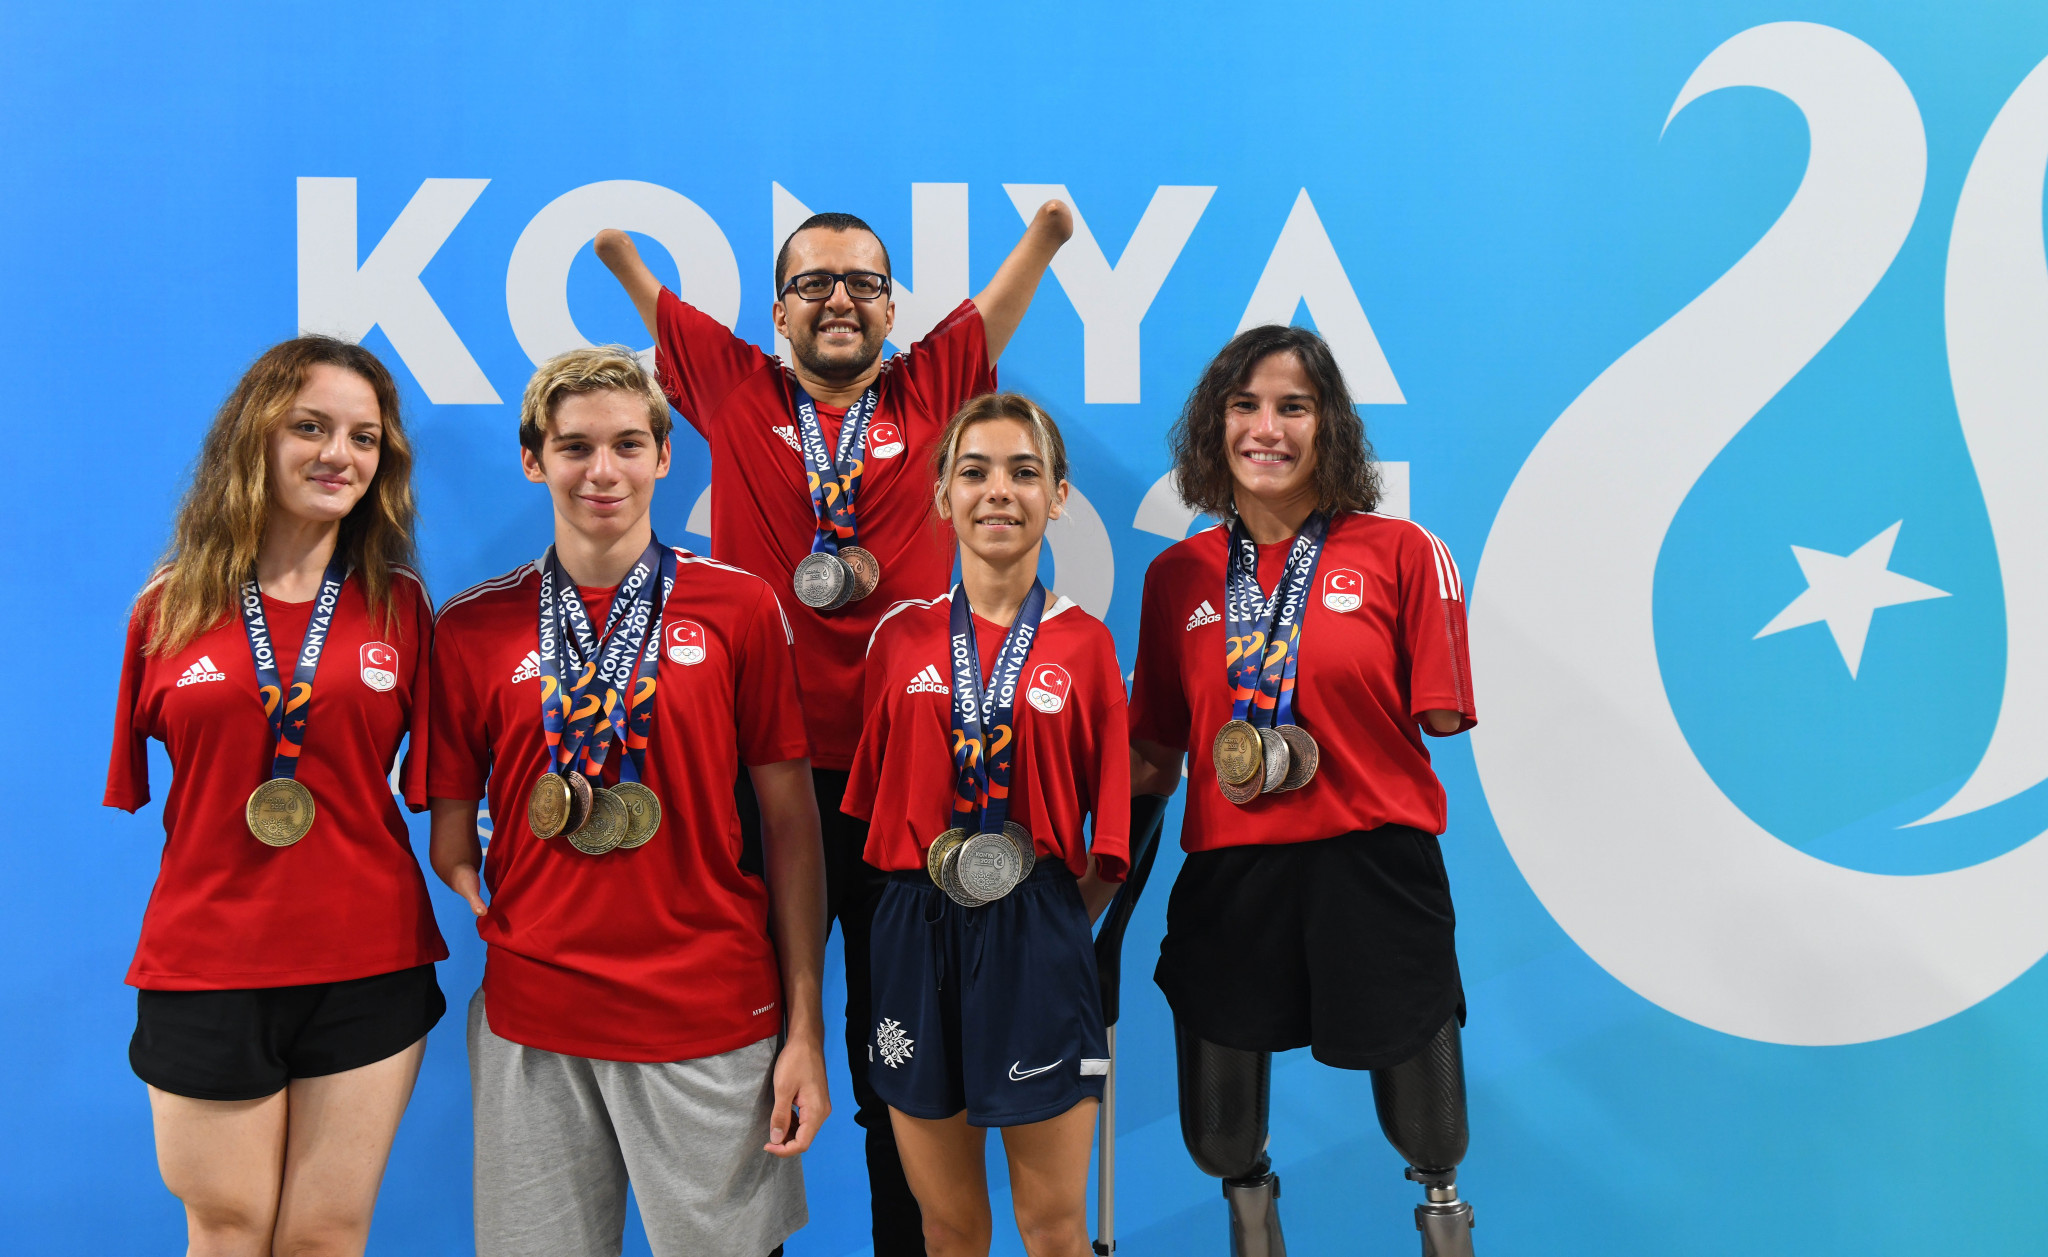 Turkish Para swimmers continue to reign supreme in the pool ©Konya 2021